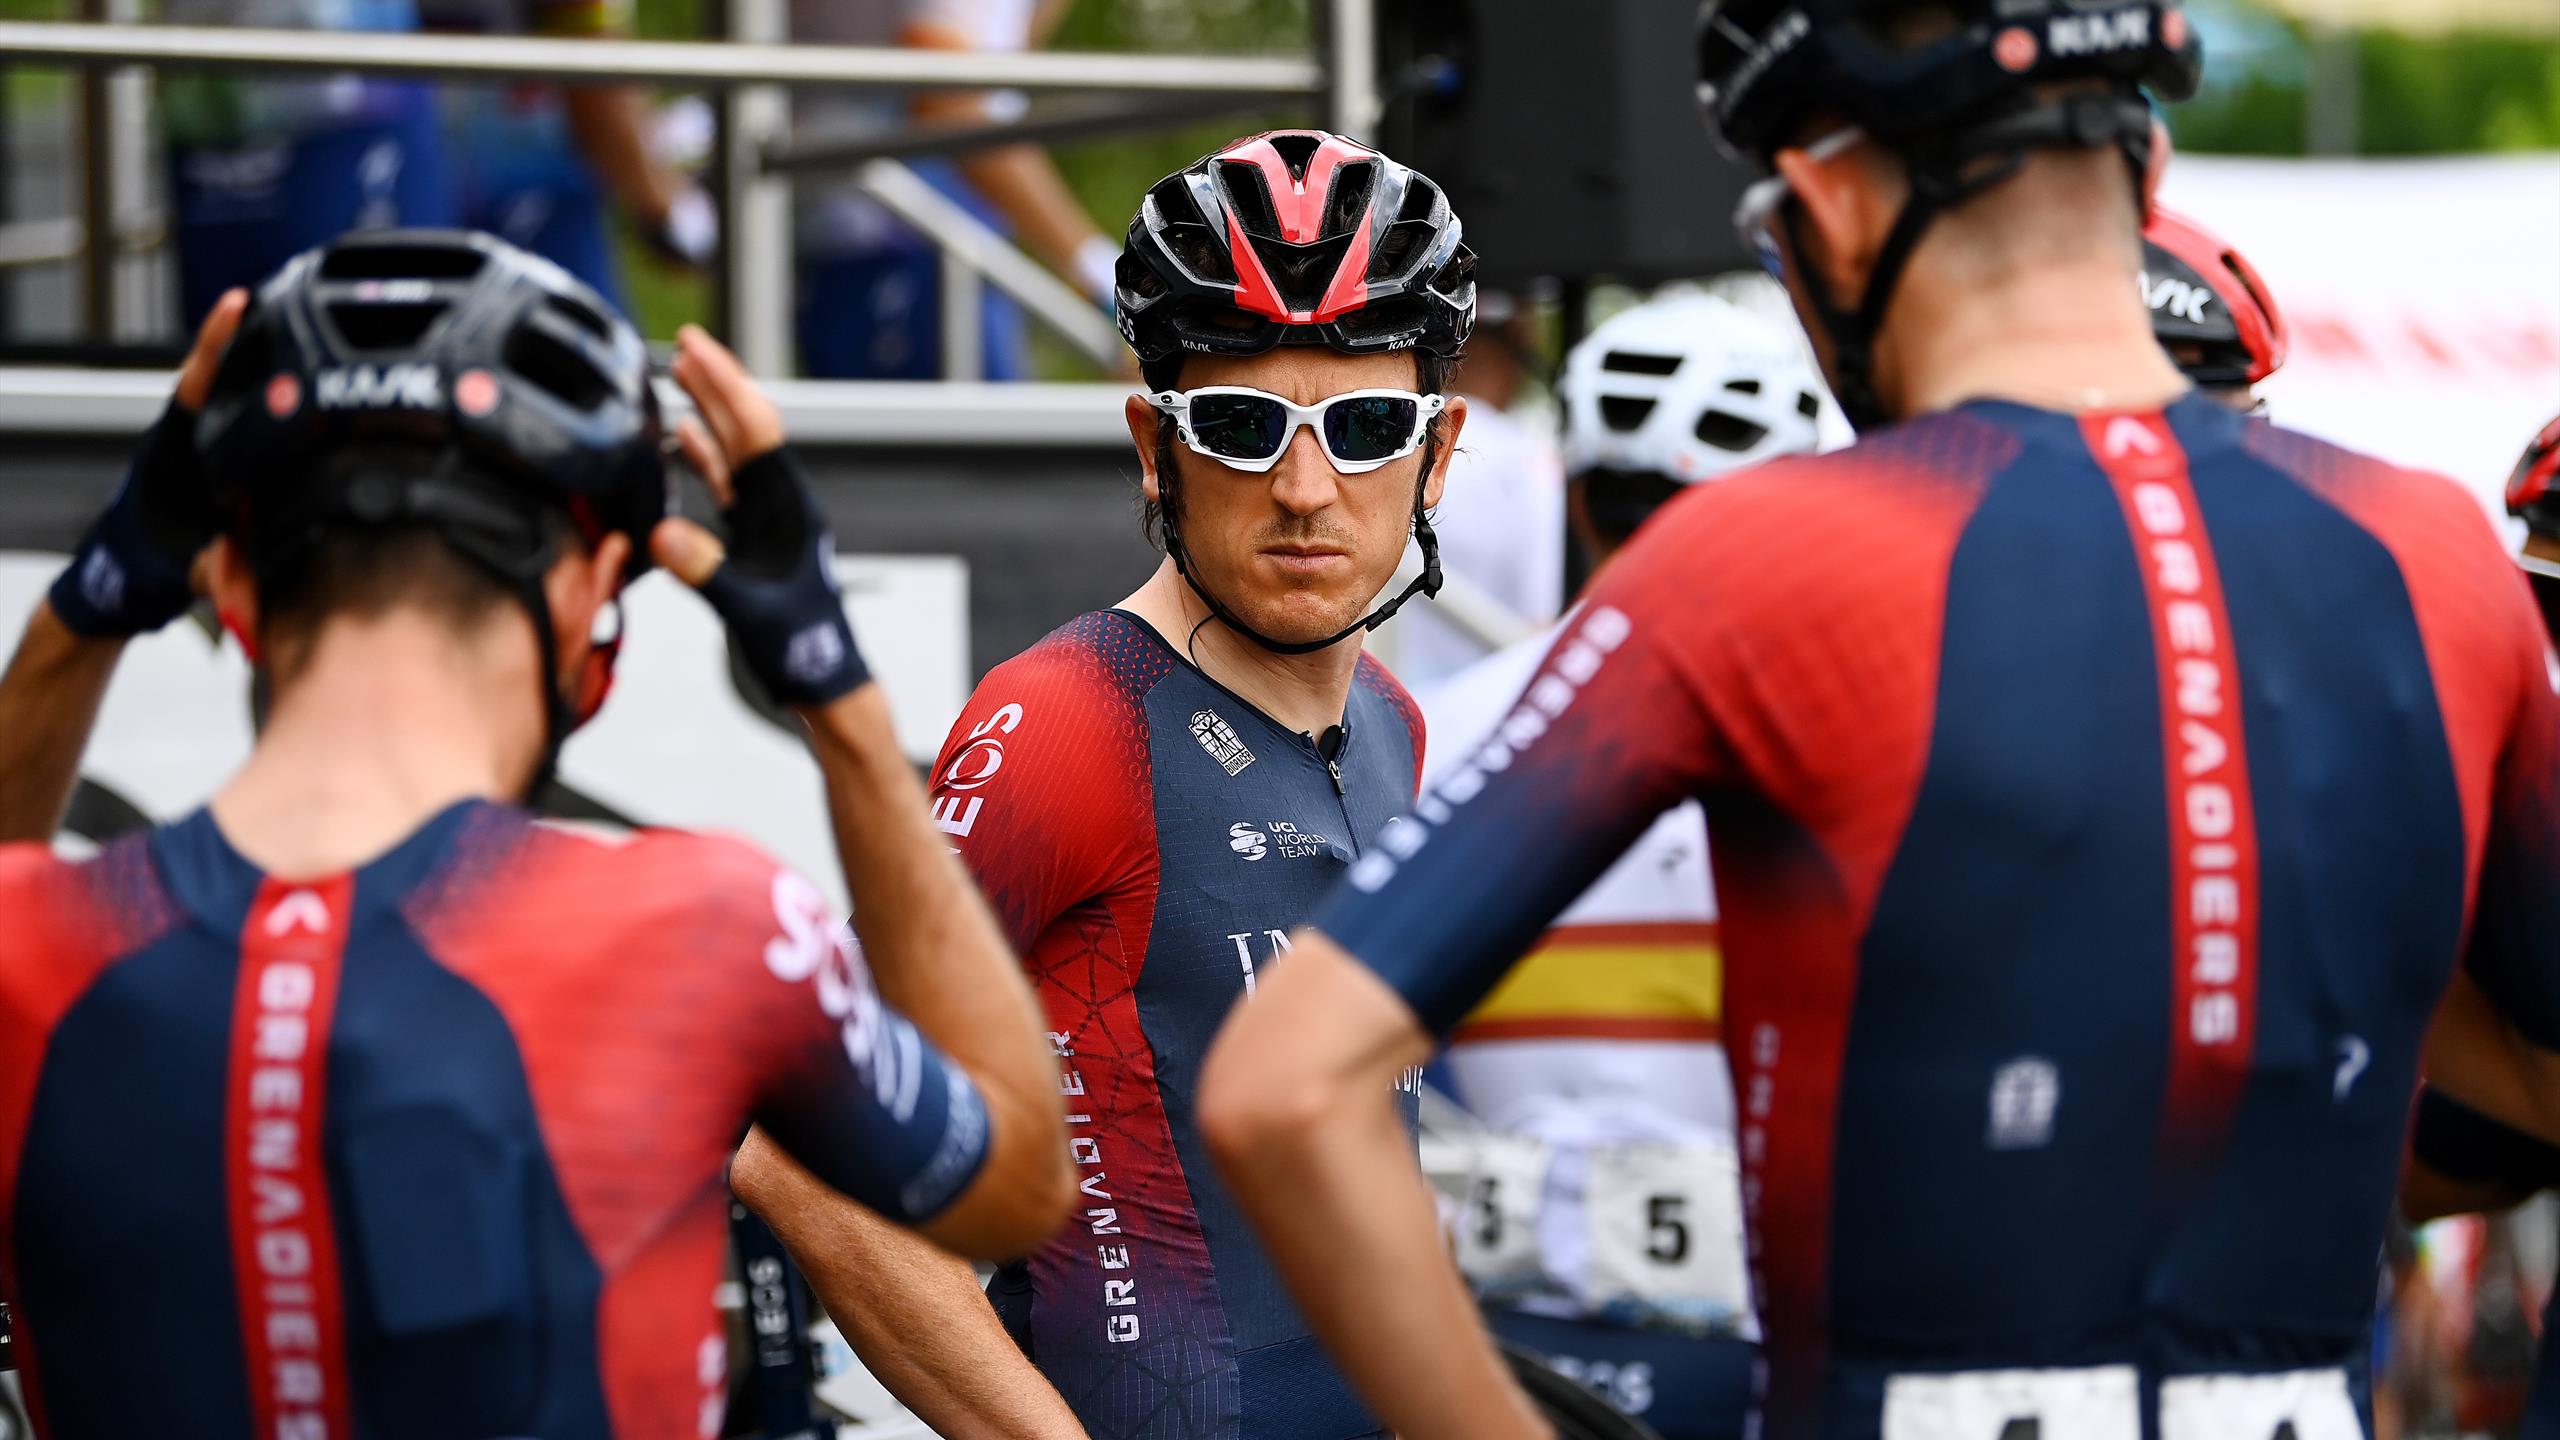 Gerant Thomas comments that the 'crazy' team in the first week of the Tour de France will determine the roles of Inios Grenadiers.

